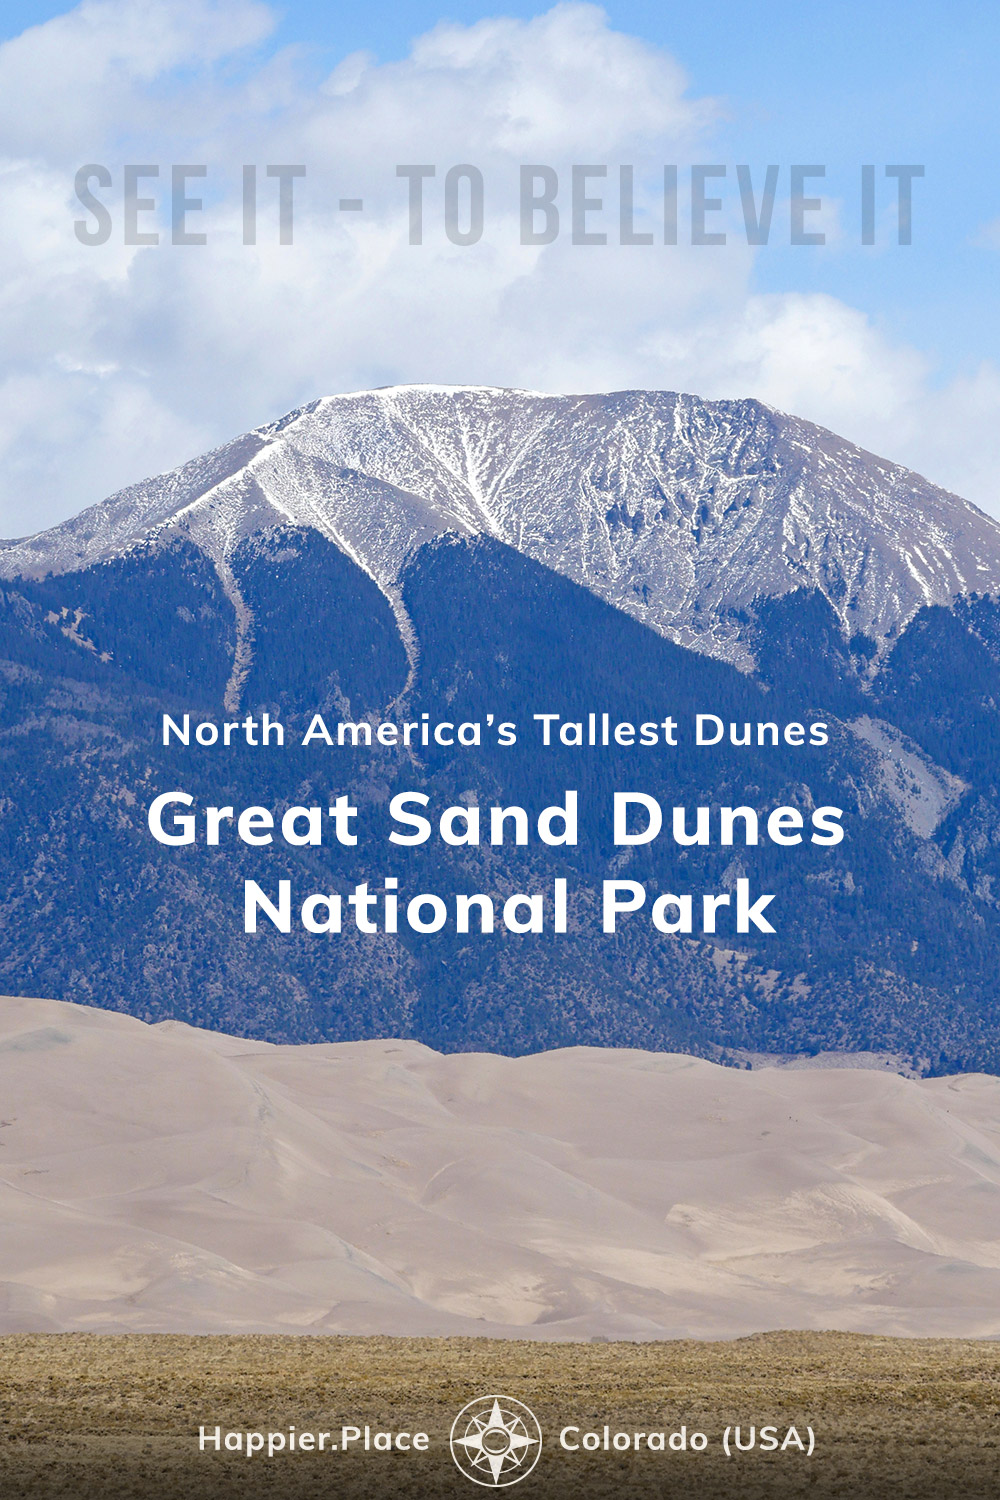 Great Sand Dunes National Park, See it to believe it, North America's tallest dunes, Colorado, mountains, happierplace